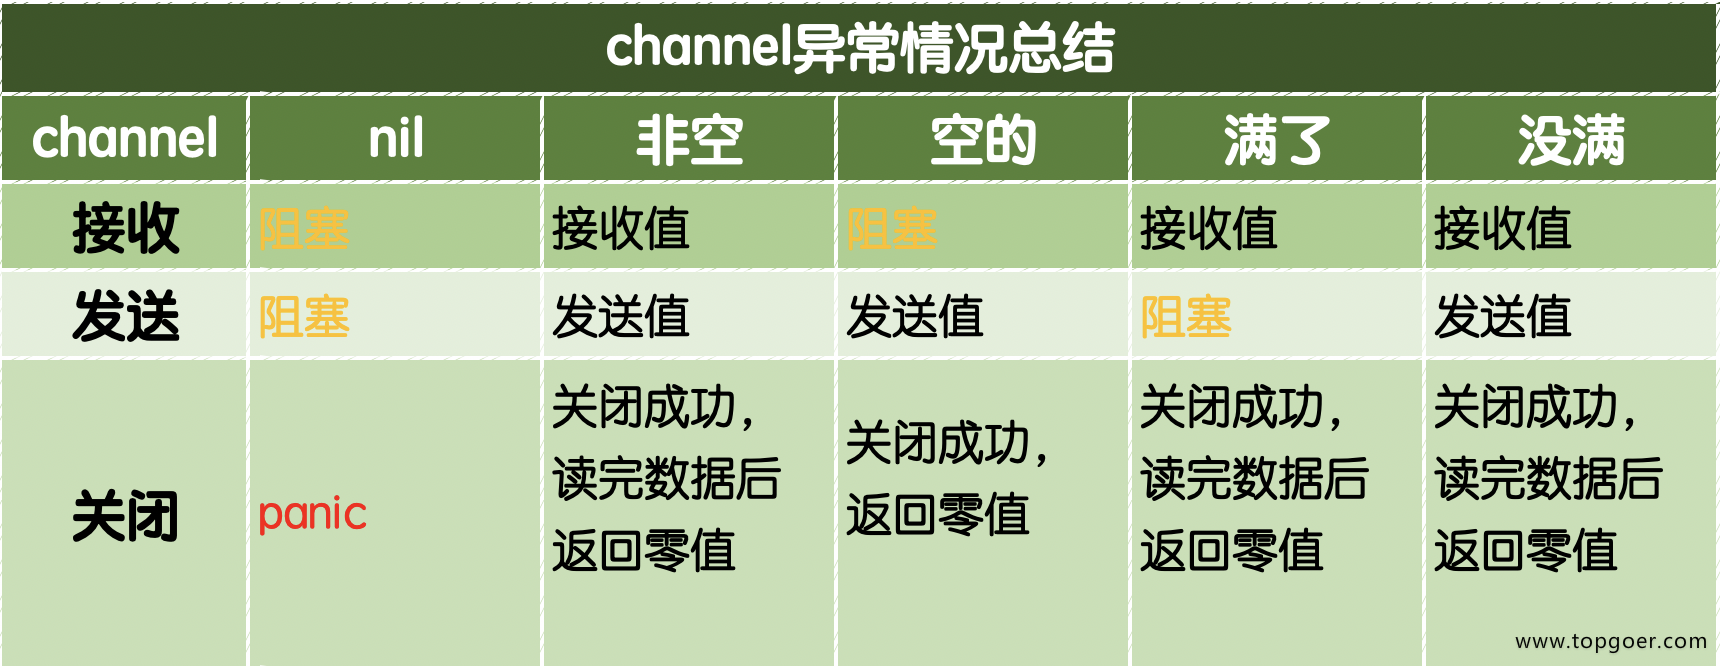 02channel - 图3